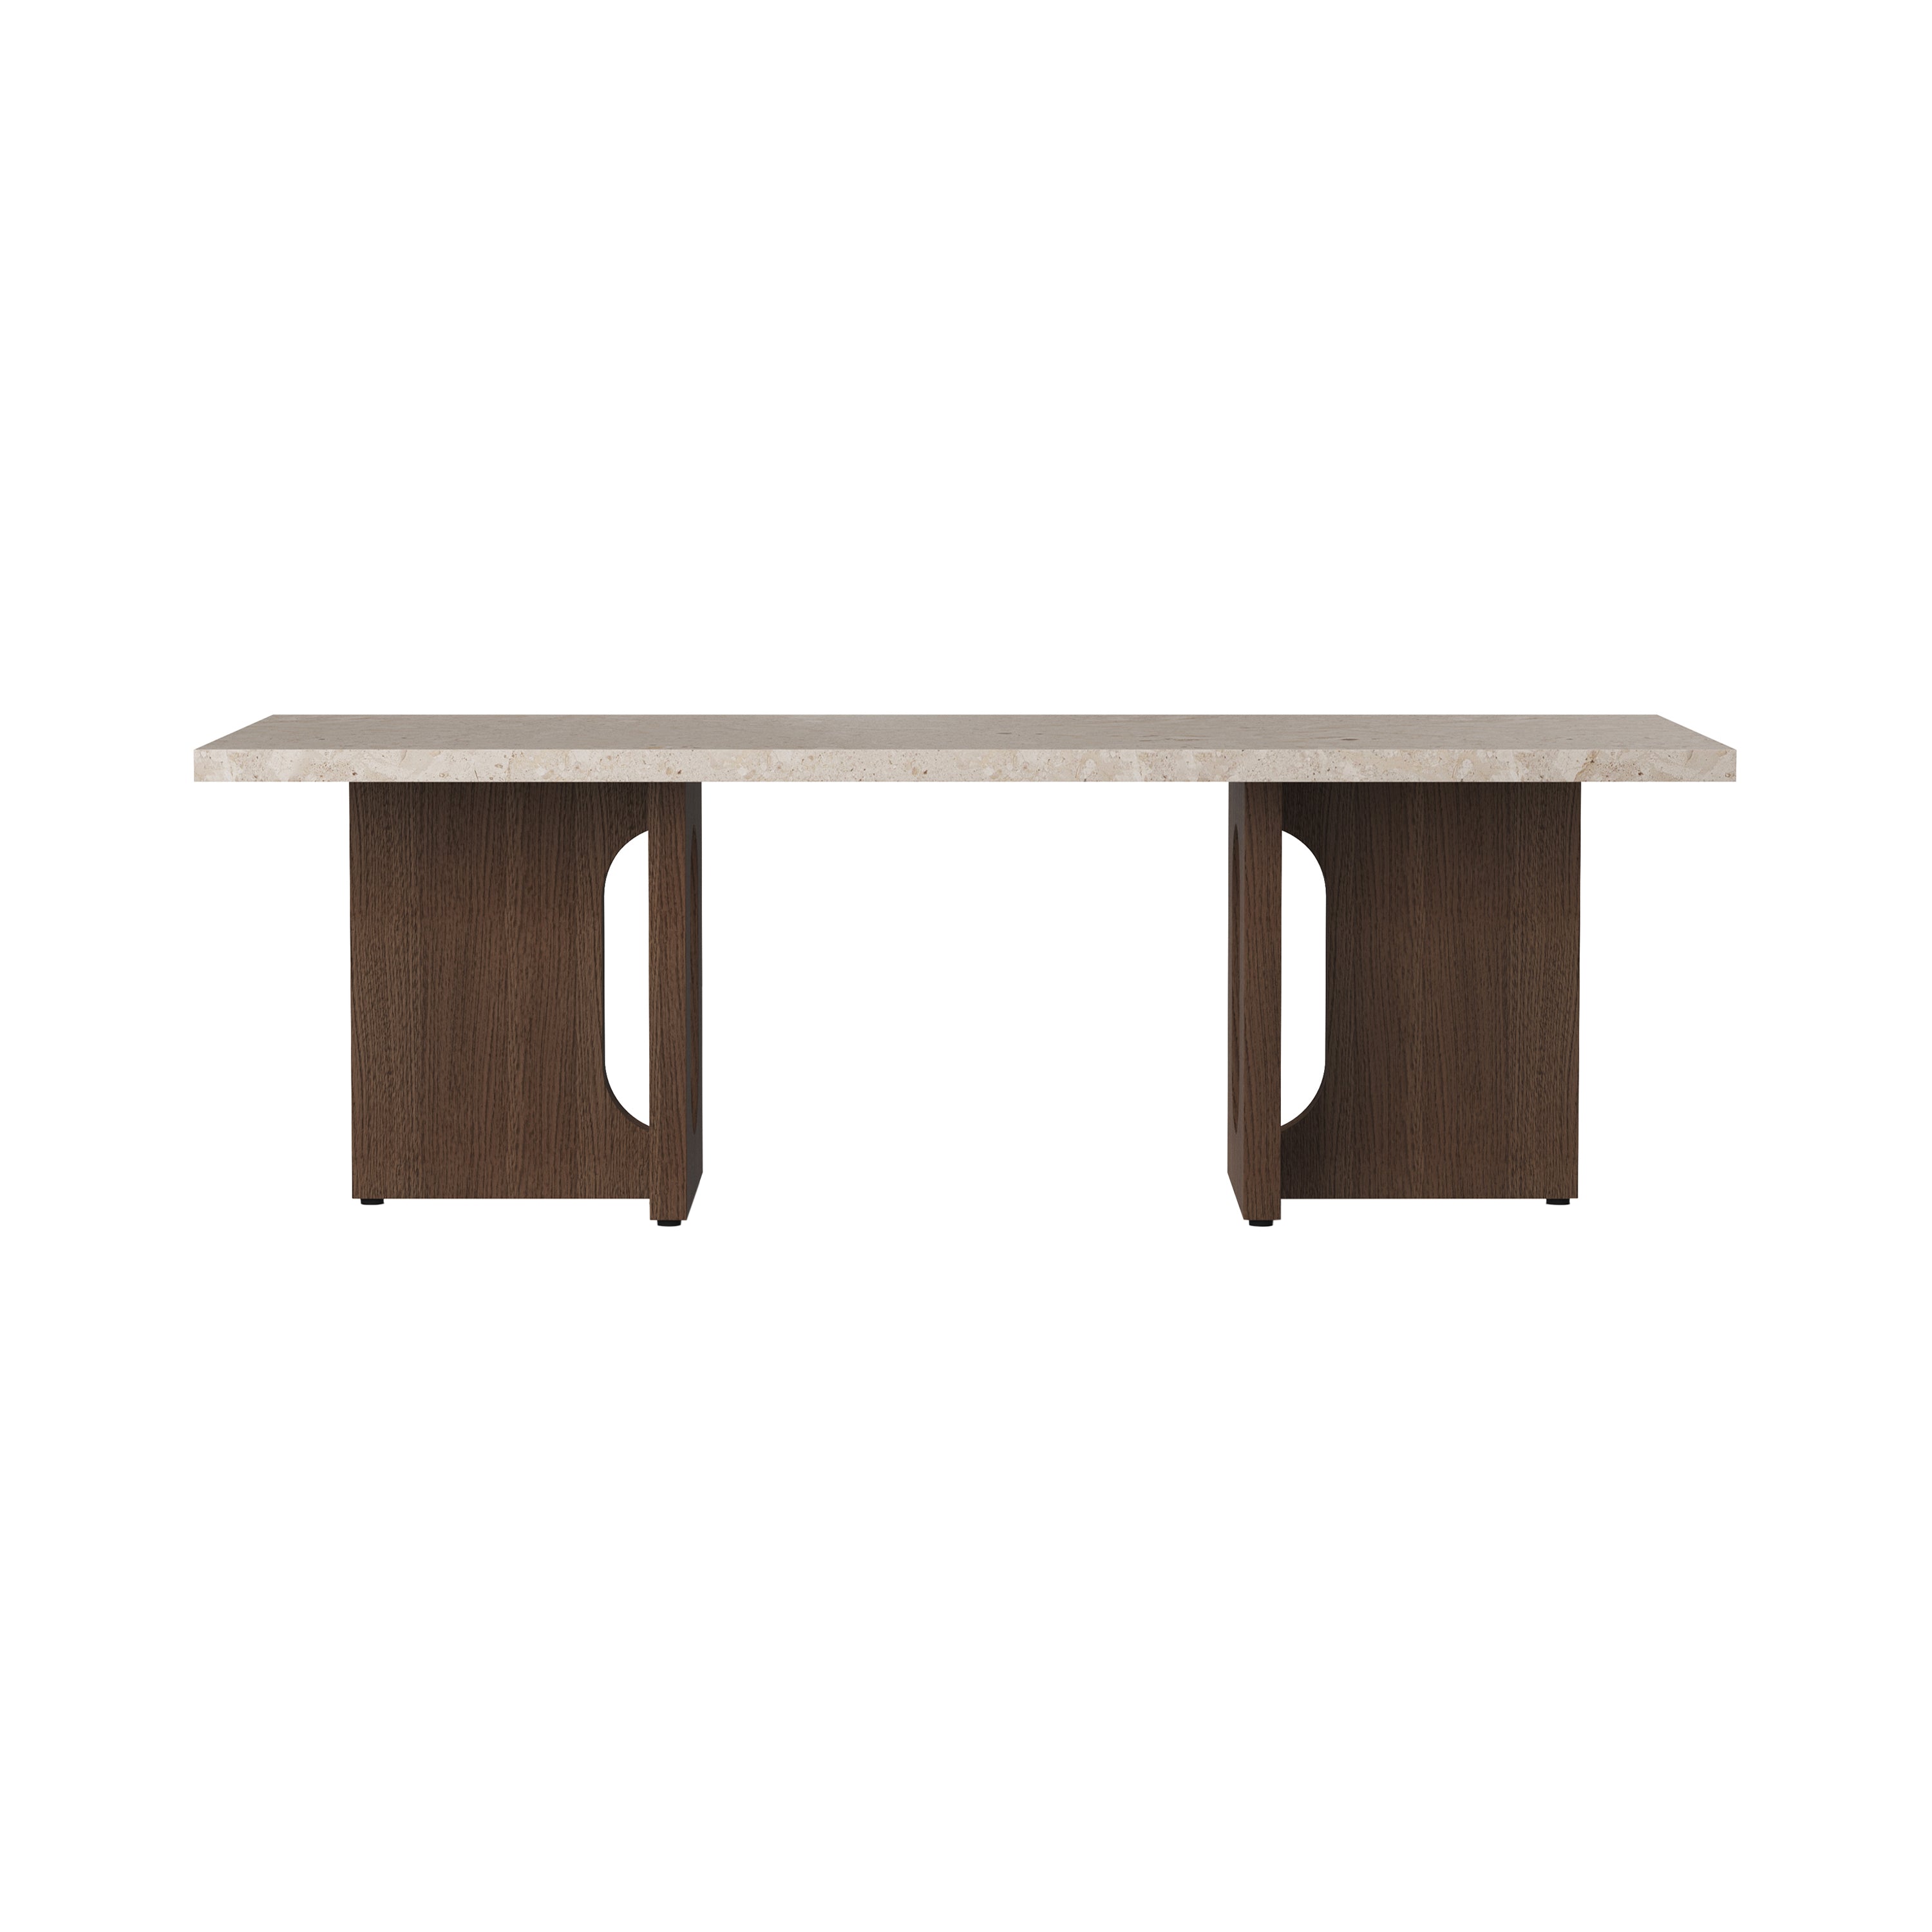 Androgyne Lounge Table: Kunis Breccia Sand Marble + Dark Stained Oak